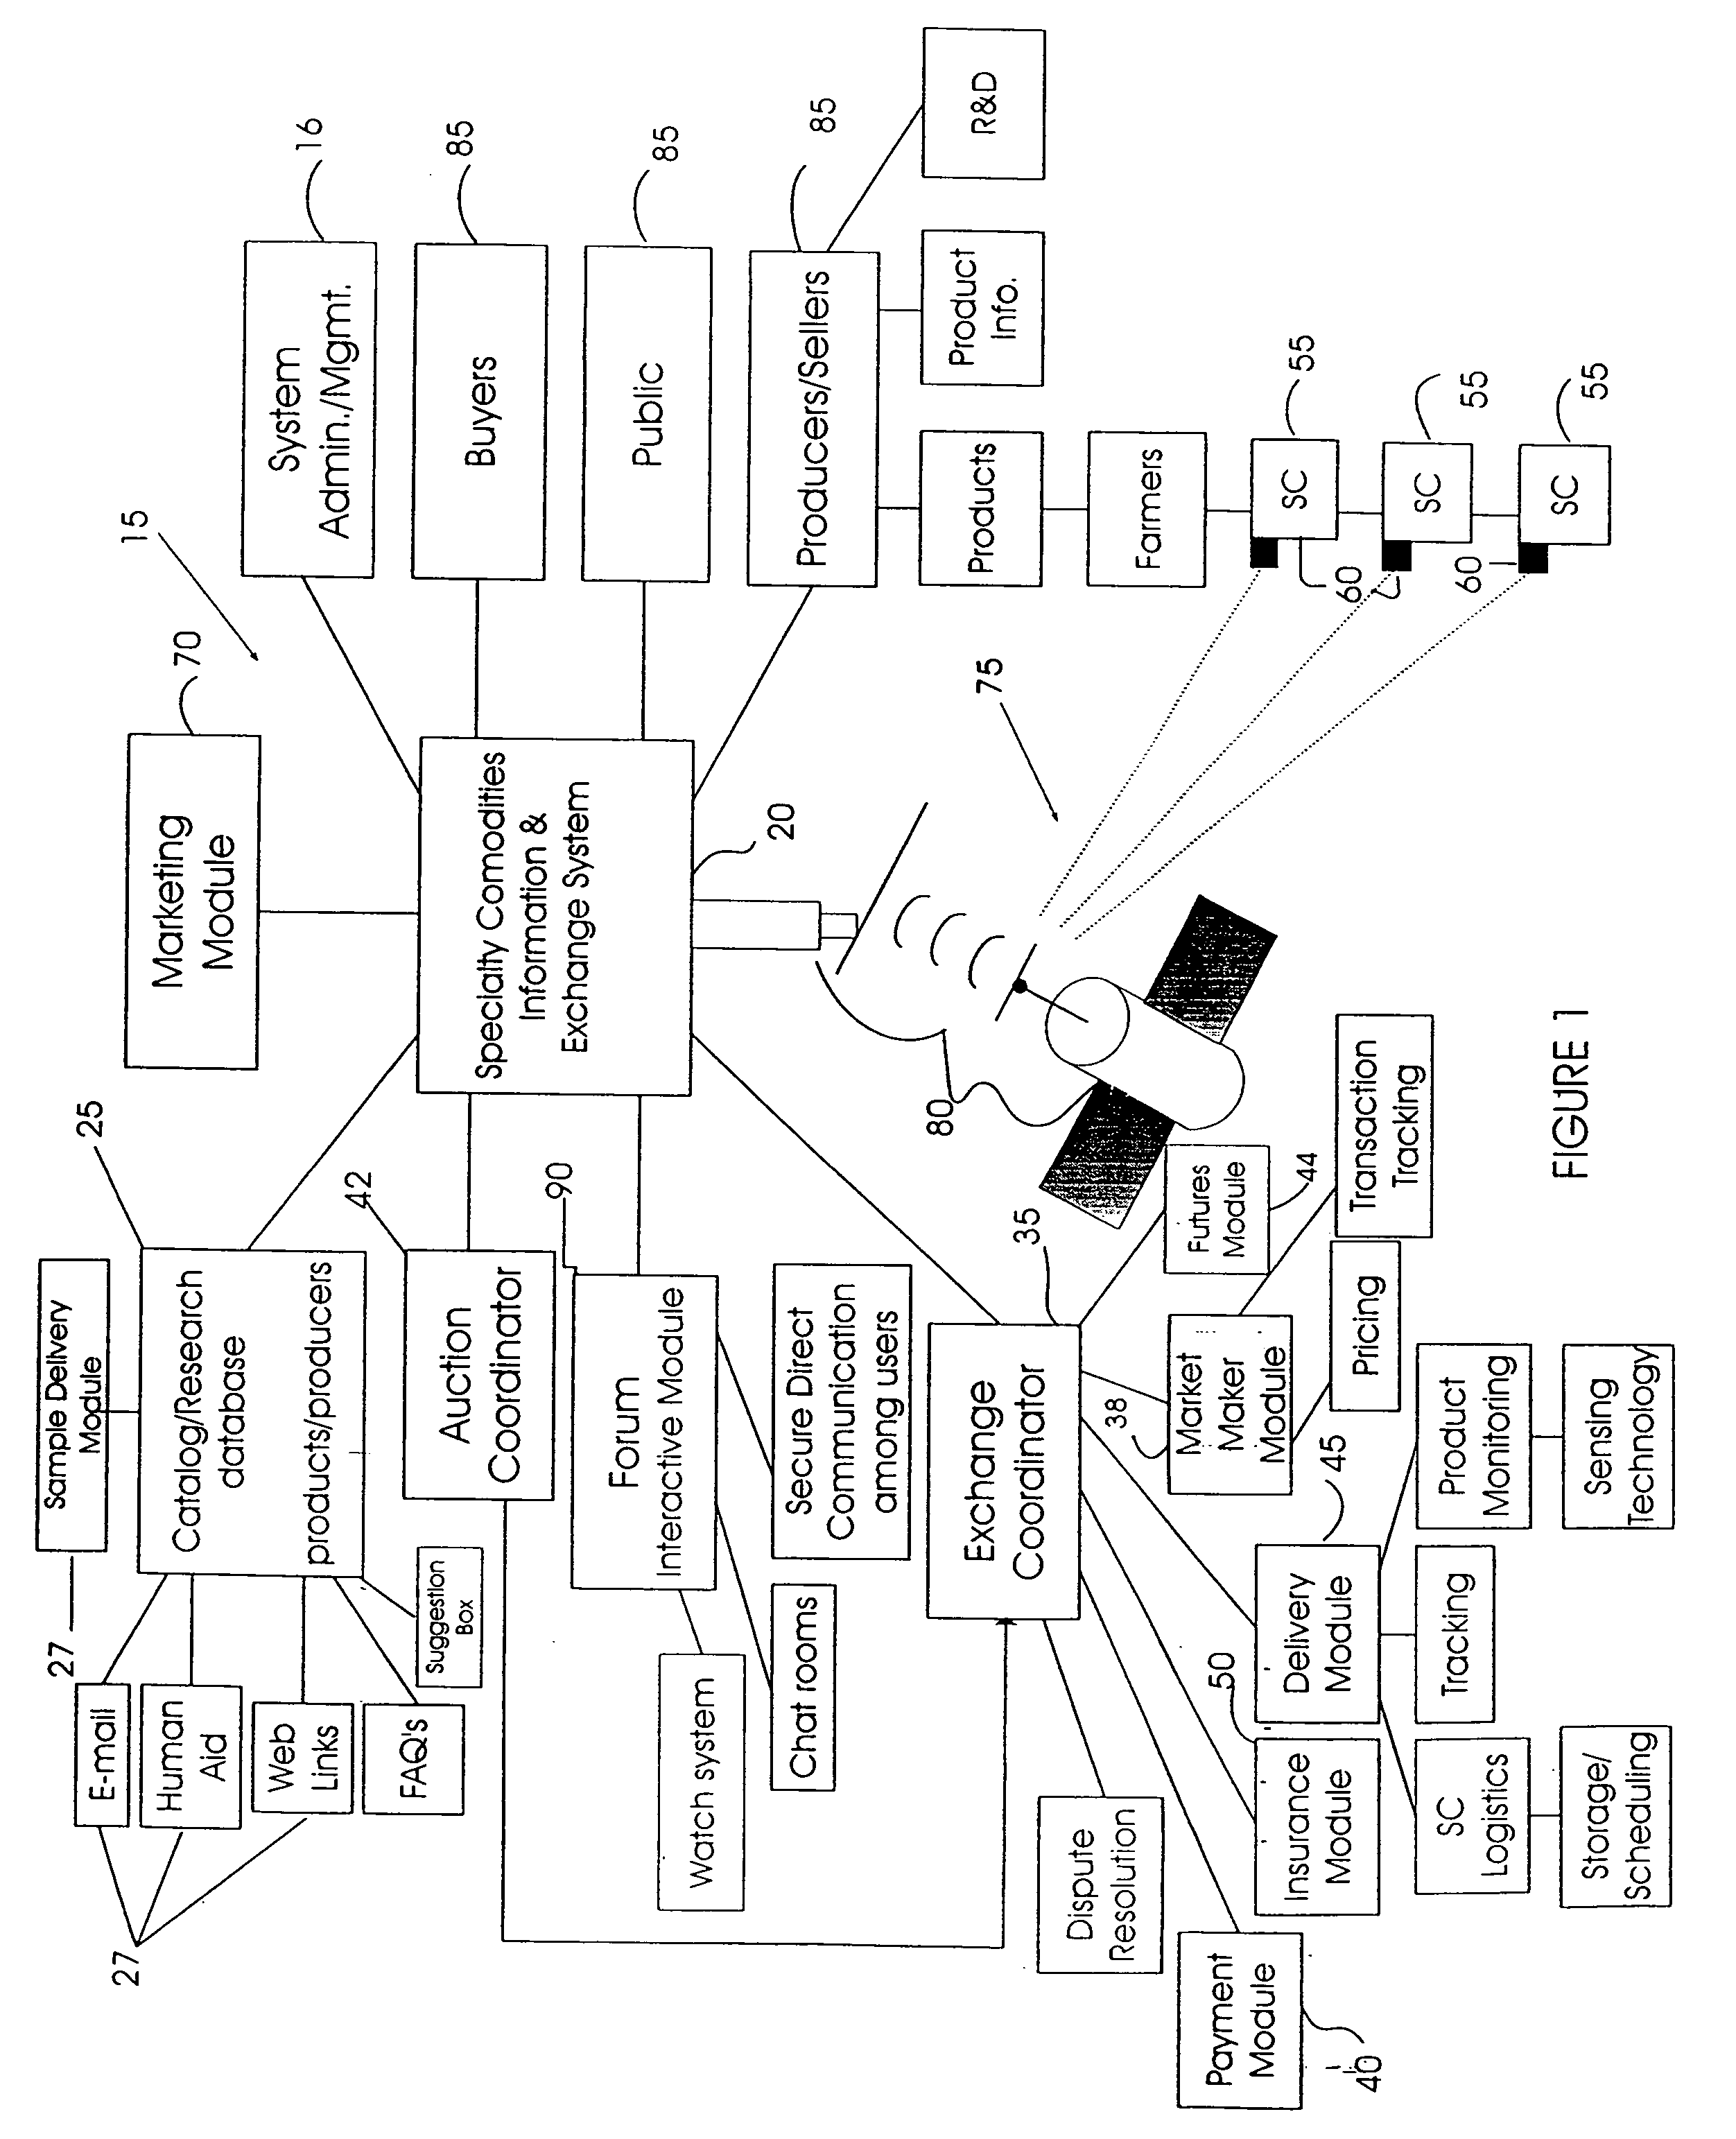 Interactive specialty commodities information and exchange system and method